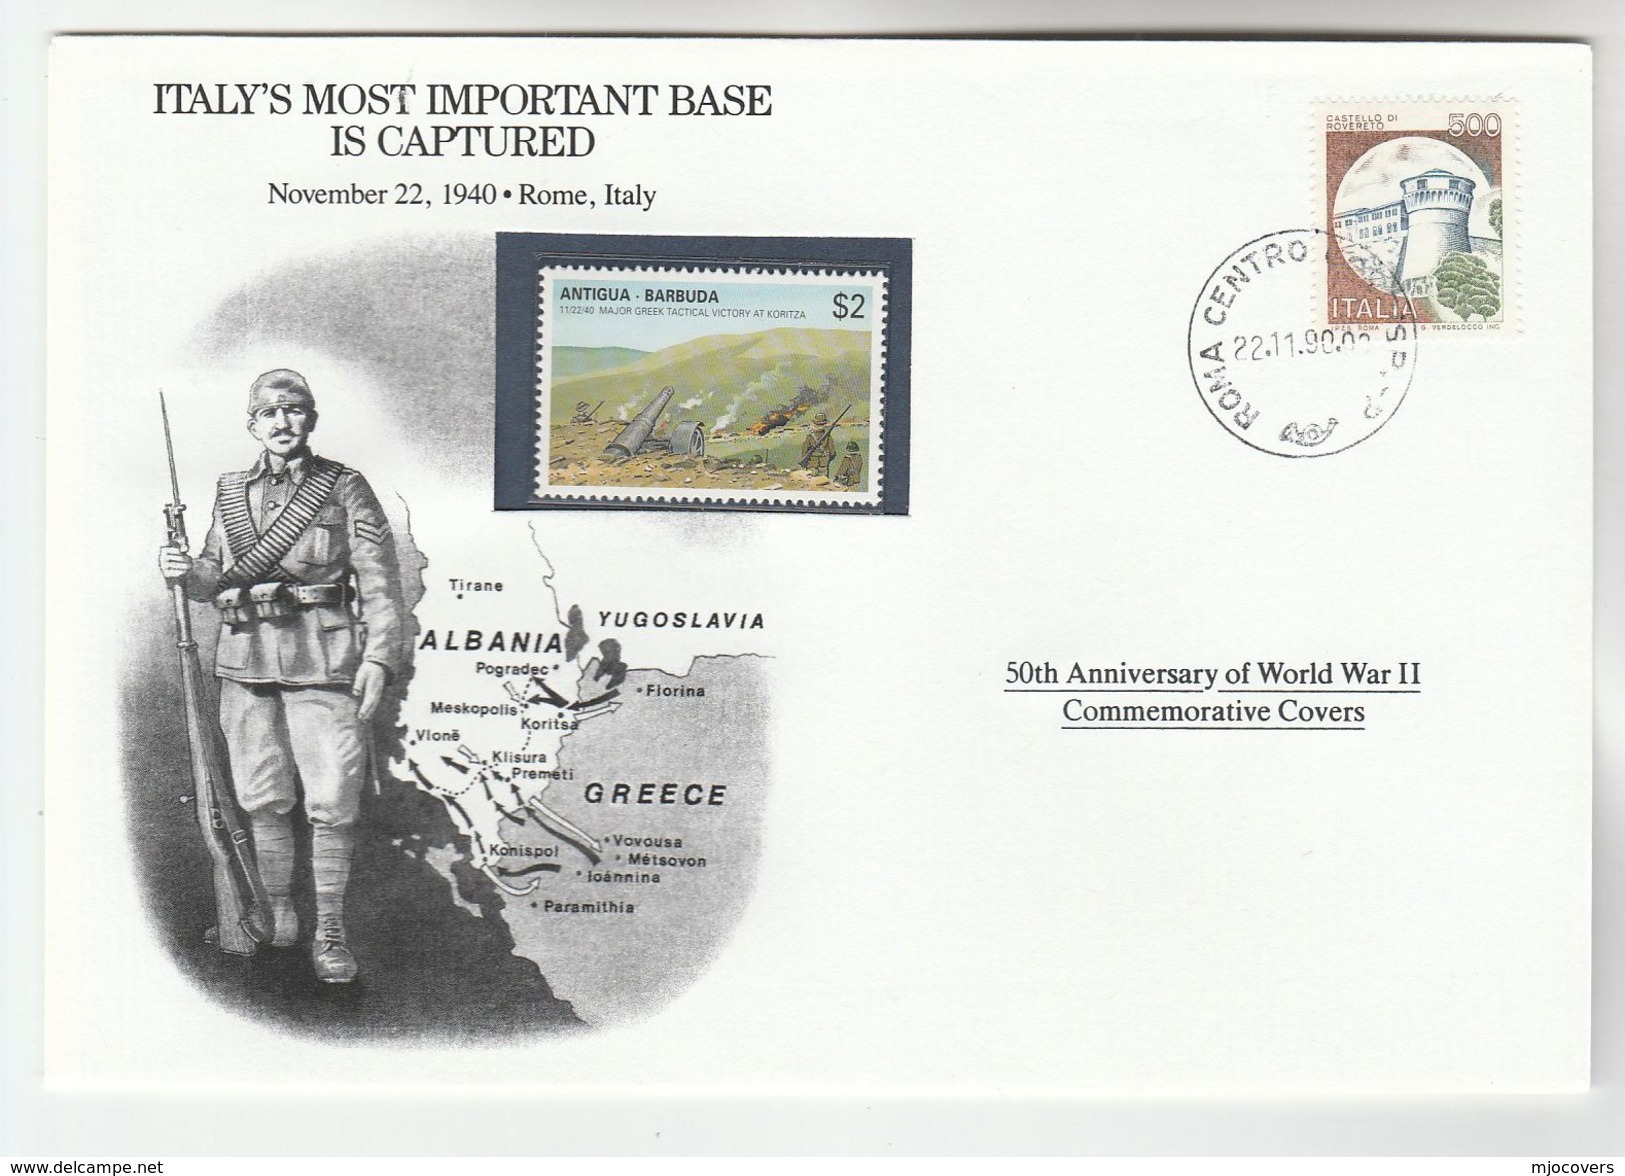 1990 ITALY Special COVER Anniv WWII KORITZA BASE ALBANIA CAPTURED Event Map Gun Forces Stamps - Seconda Guerra Mondiale